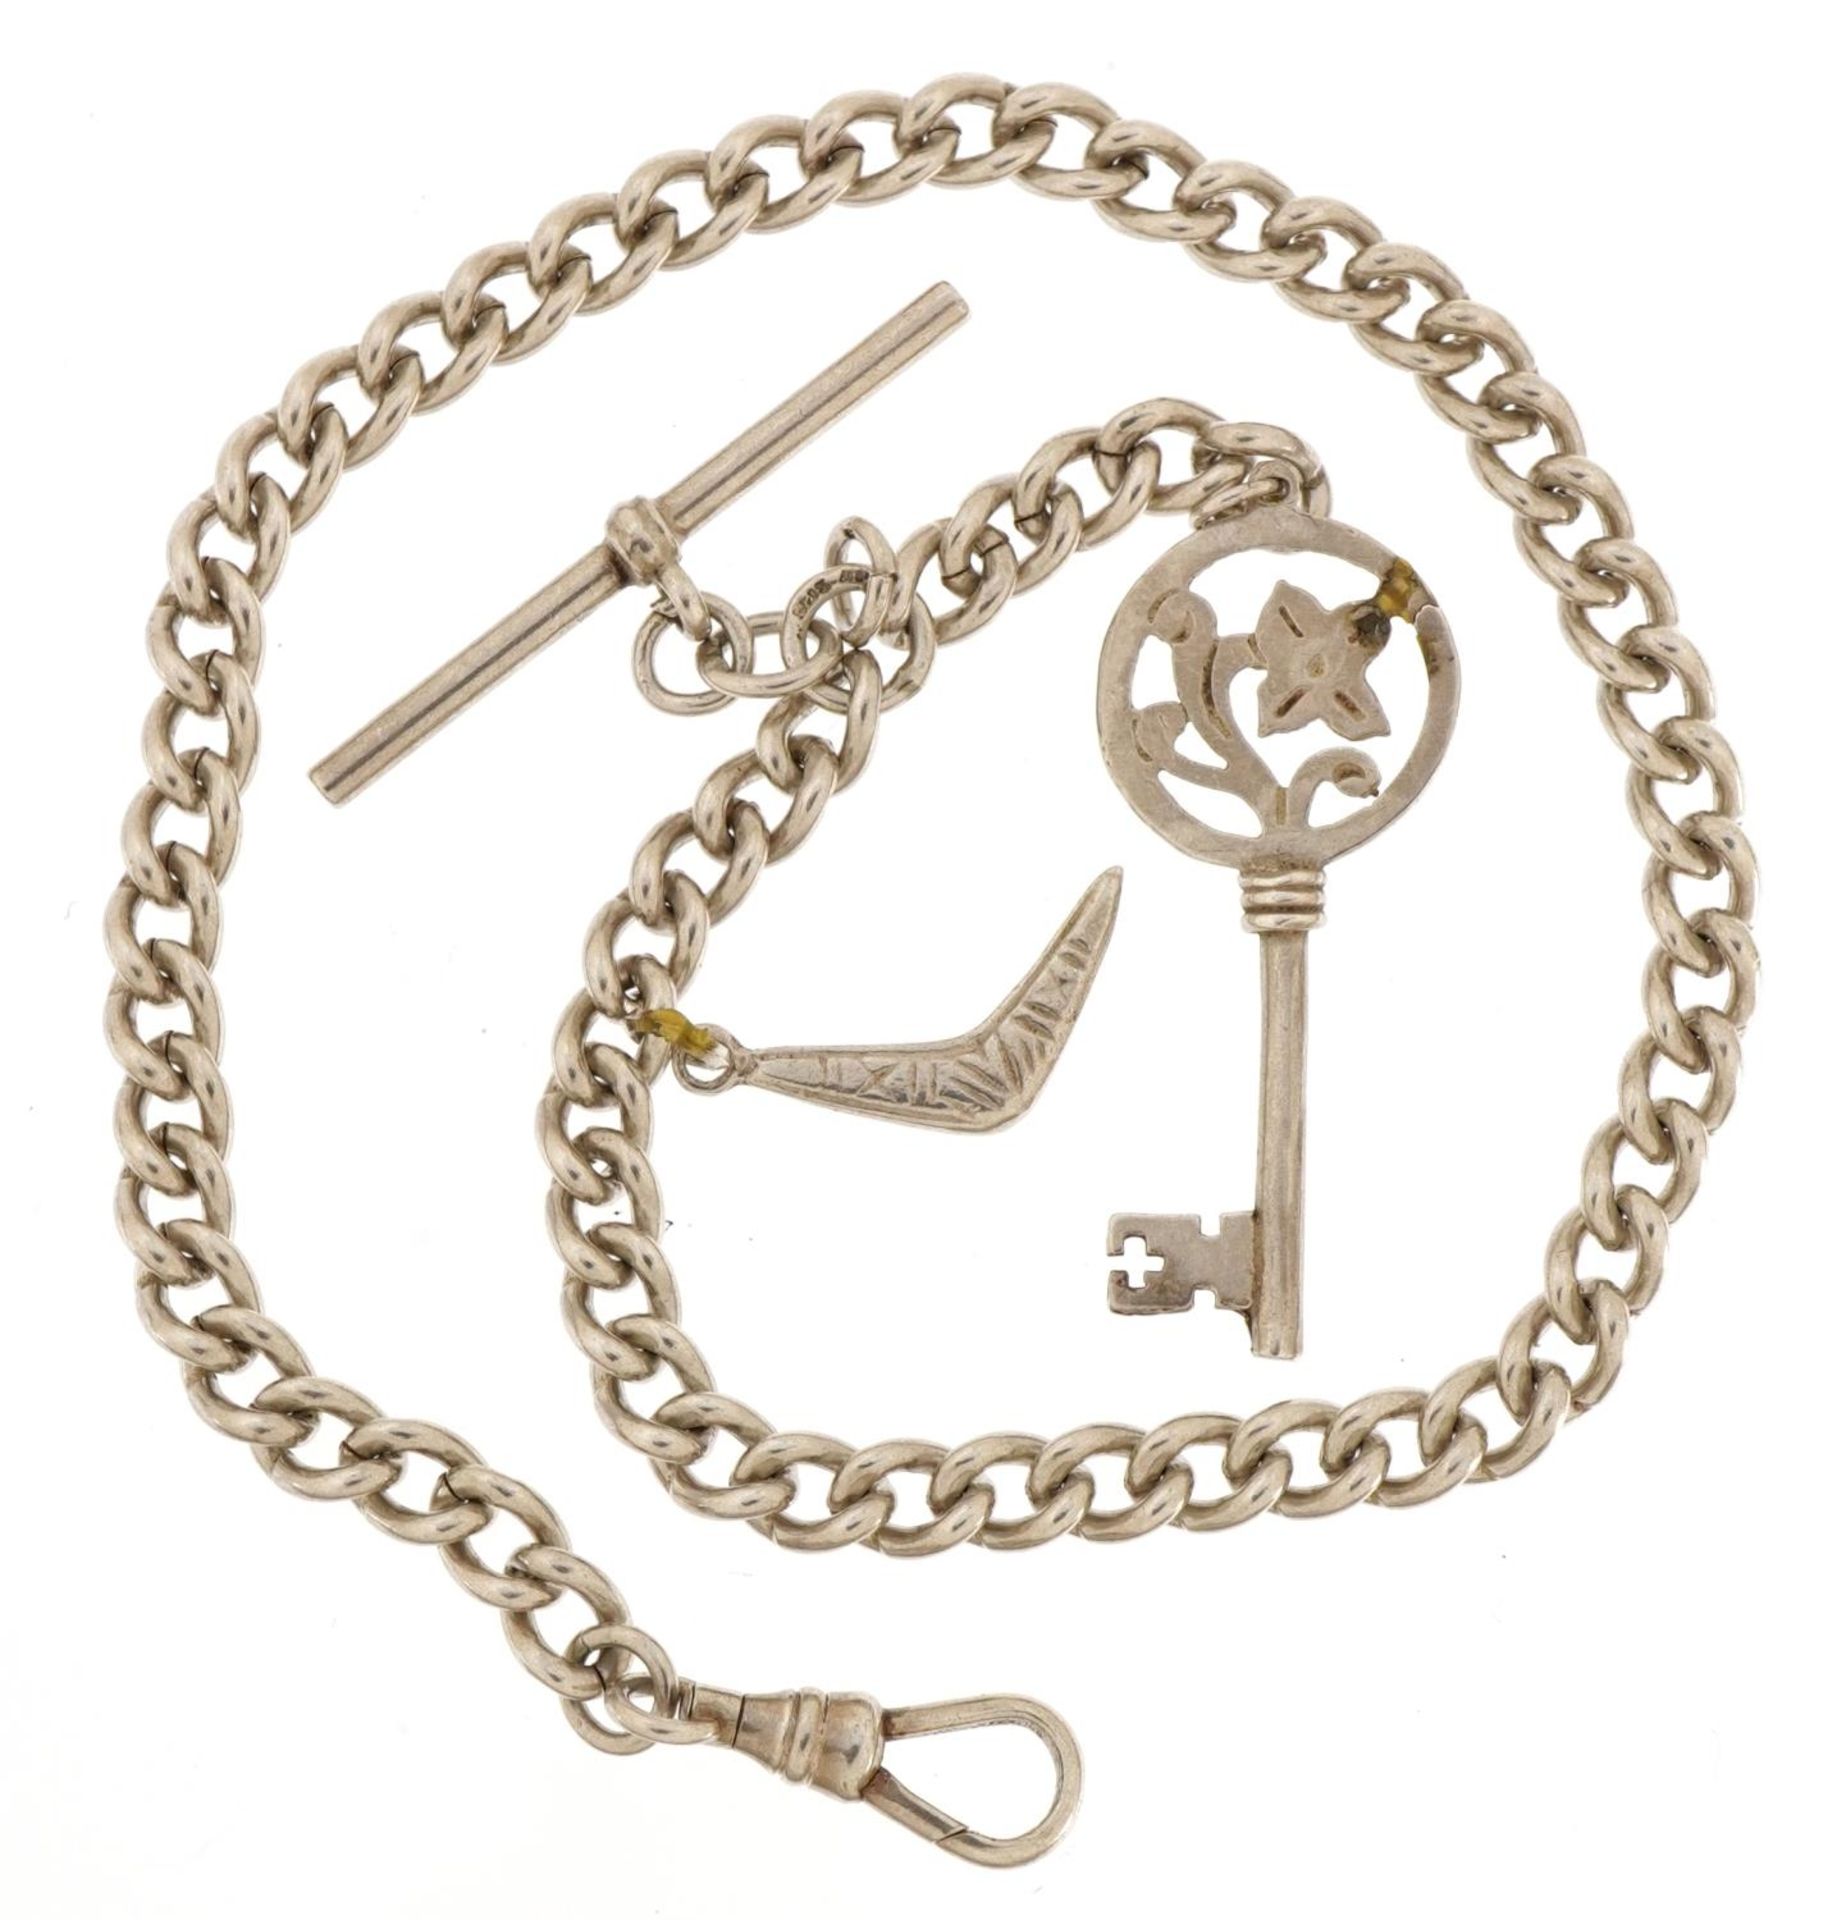 White metal watch chain with silver T bar and silver swivel clasp, 32cm in length, 30.5g